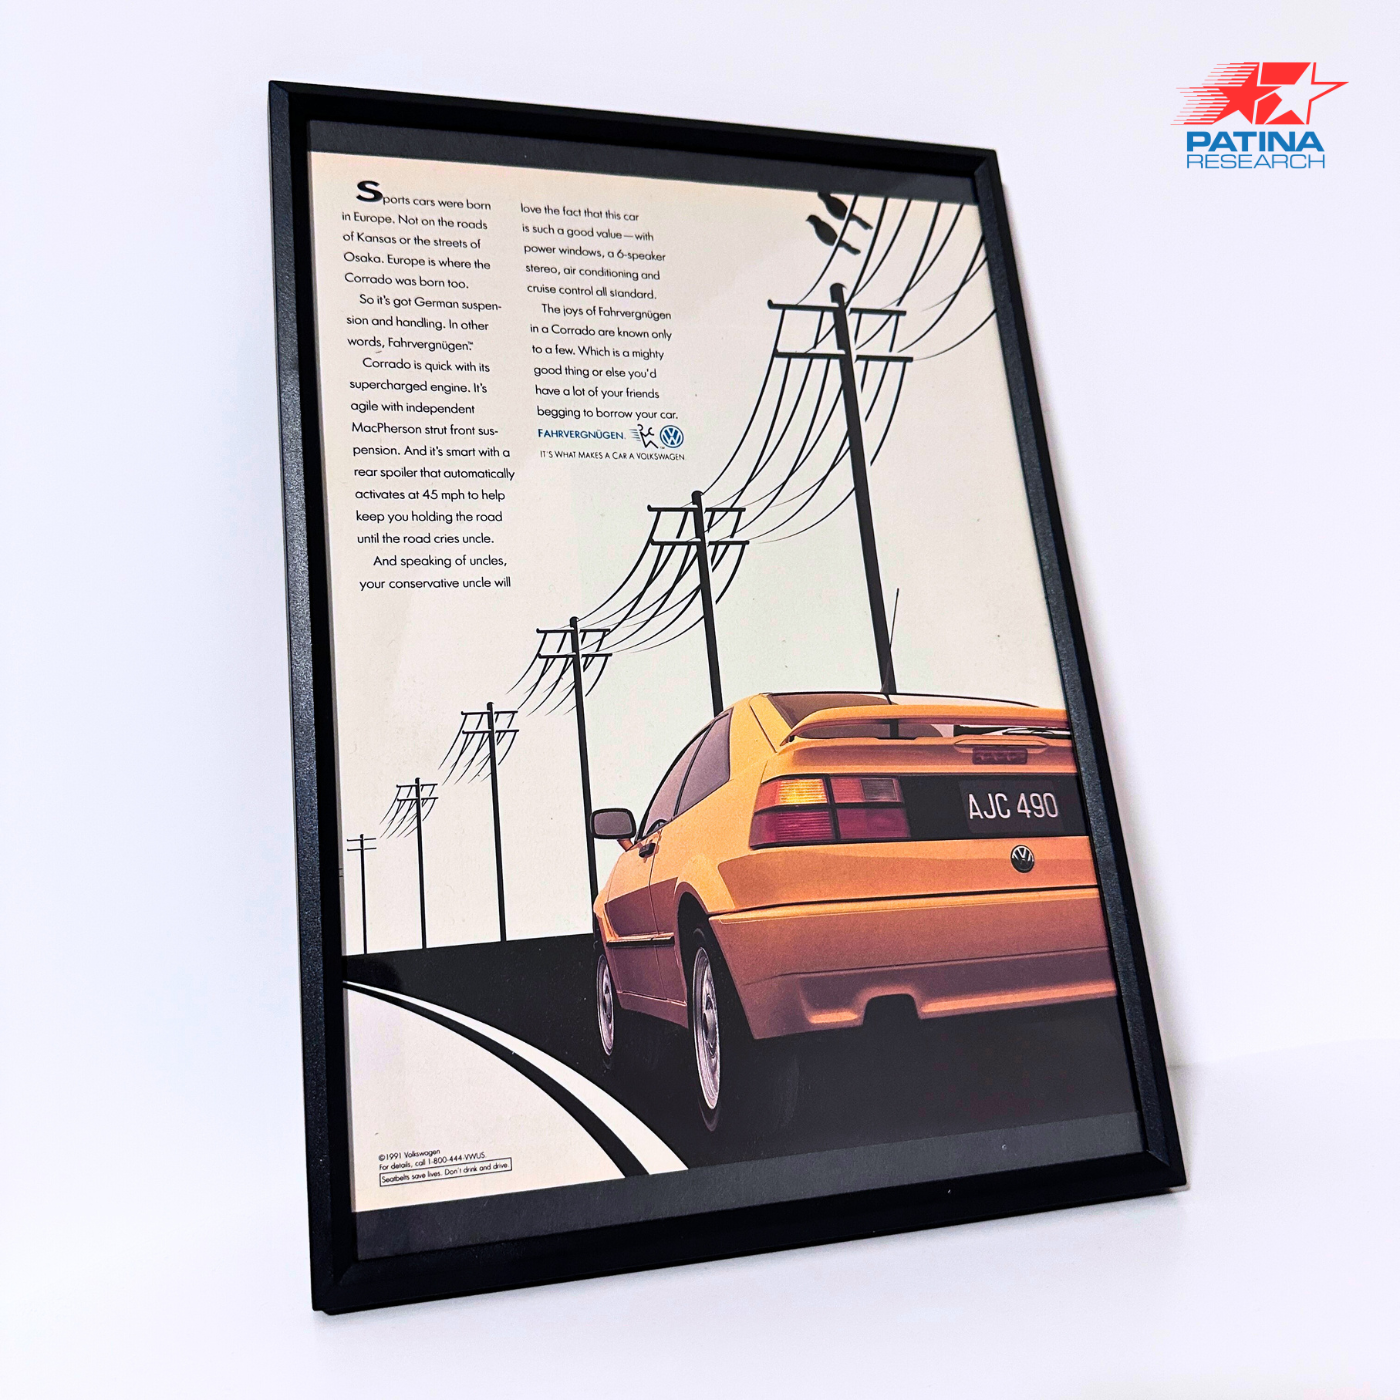 Volkswagen sports cars were born in Europe framed ad